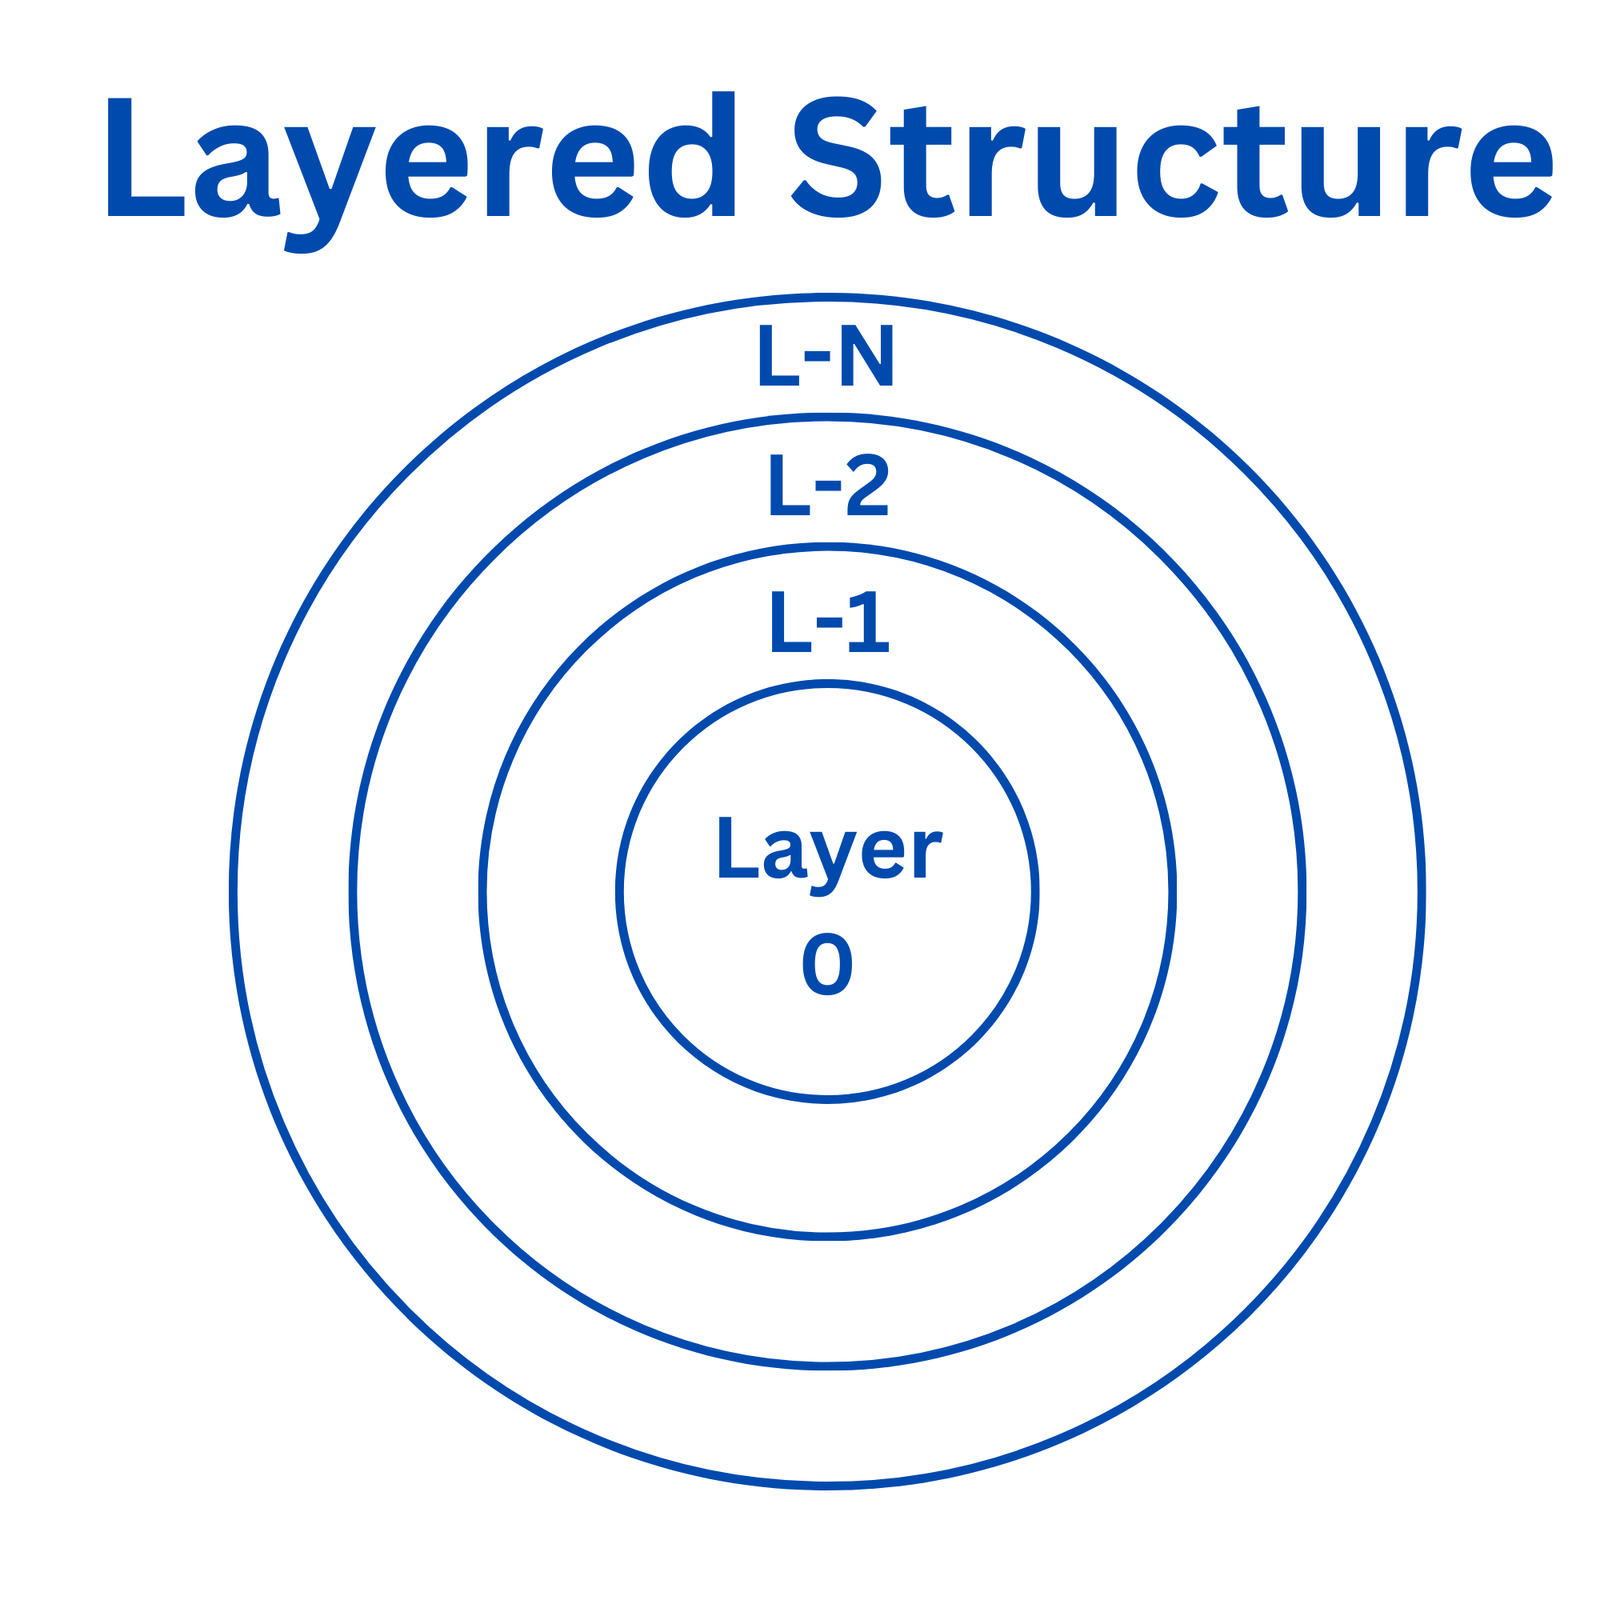 Layered structure of an operating system